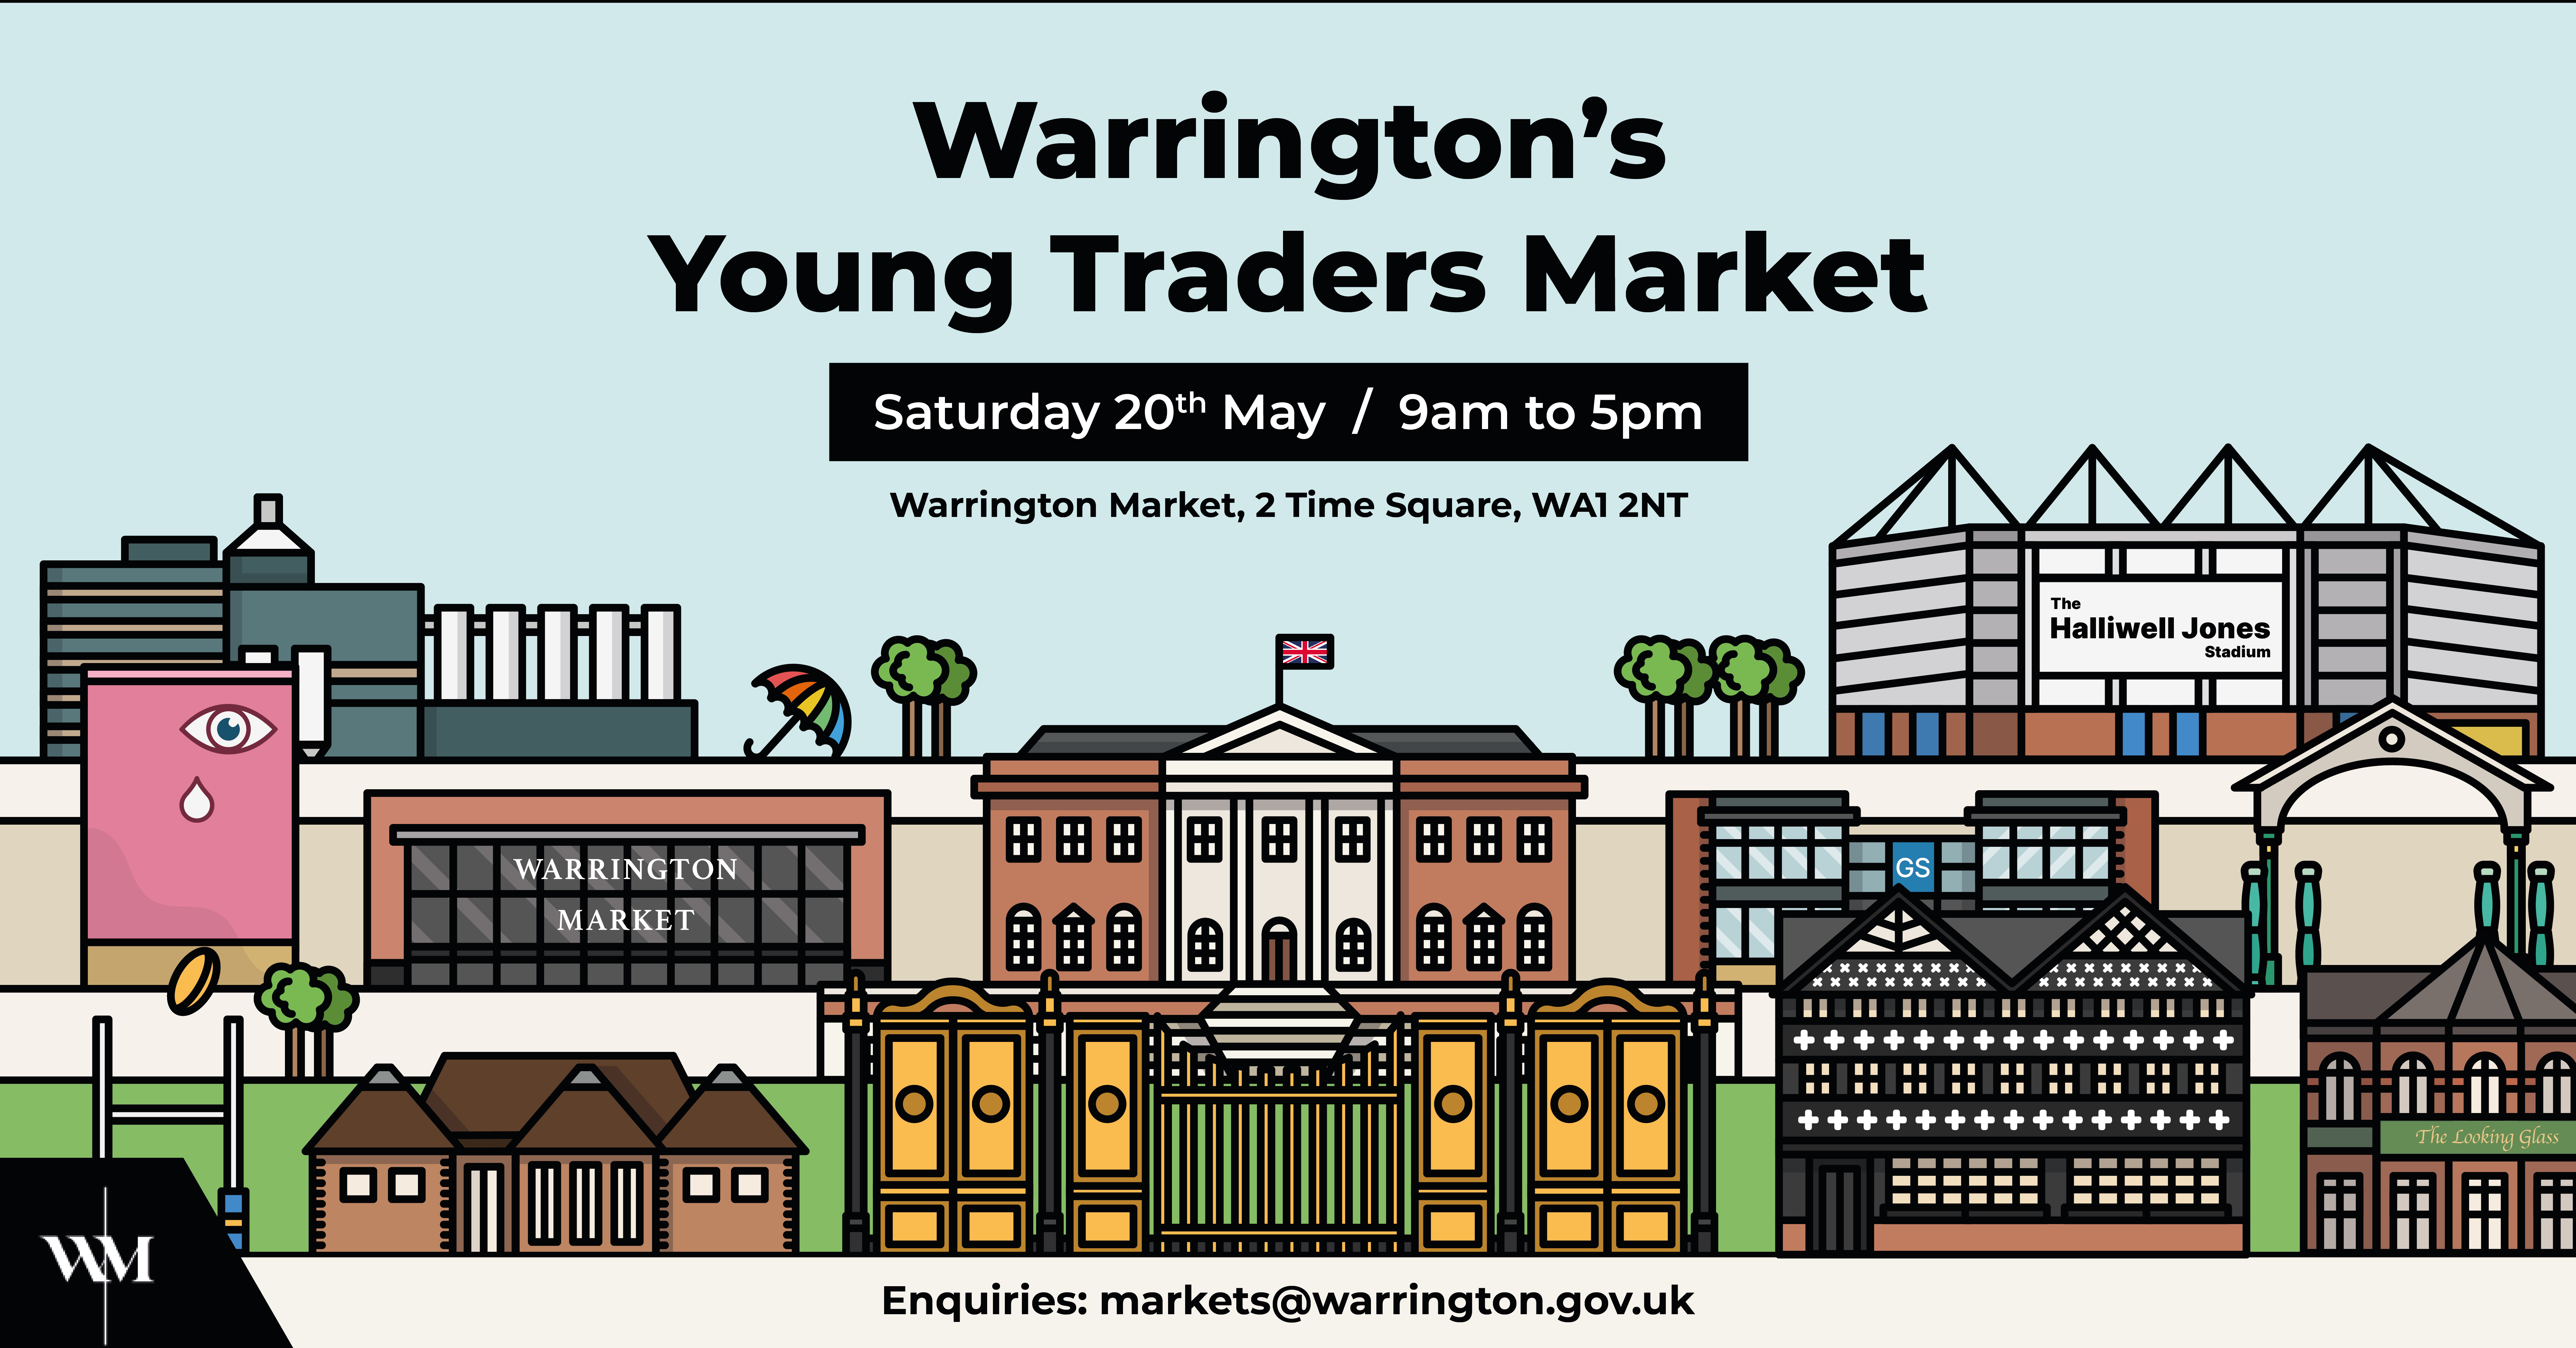 Warrington's Young Traders Market returns to Time Square on Saturday 20 May